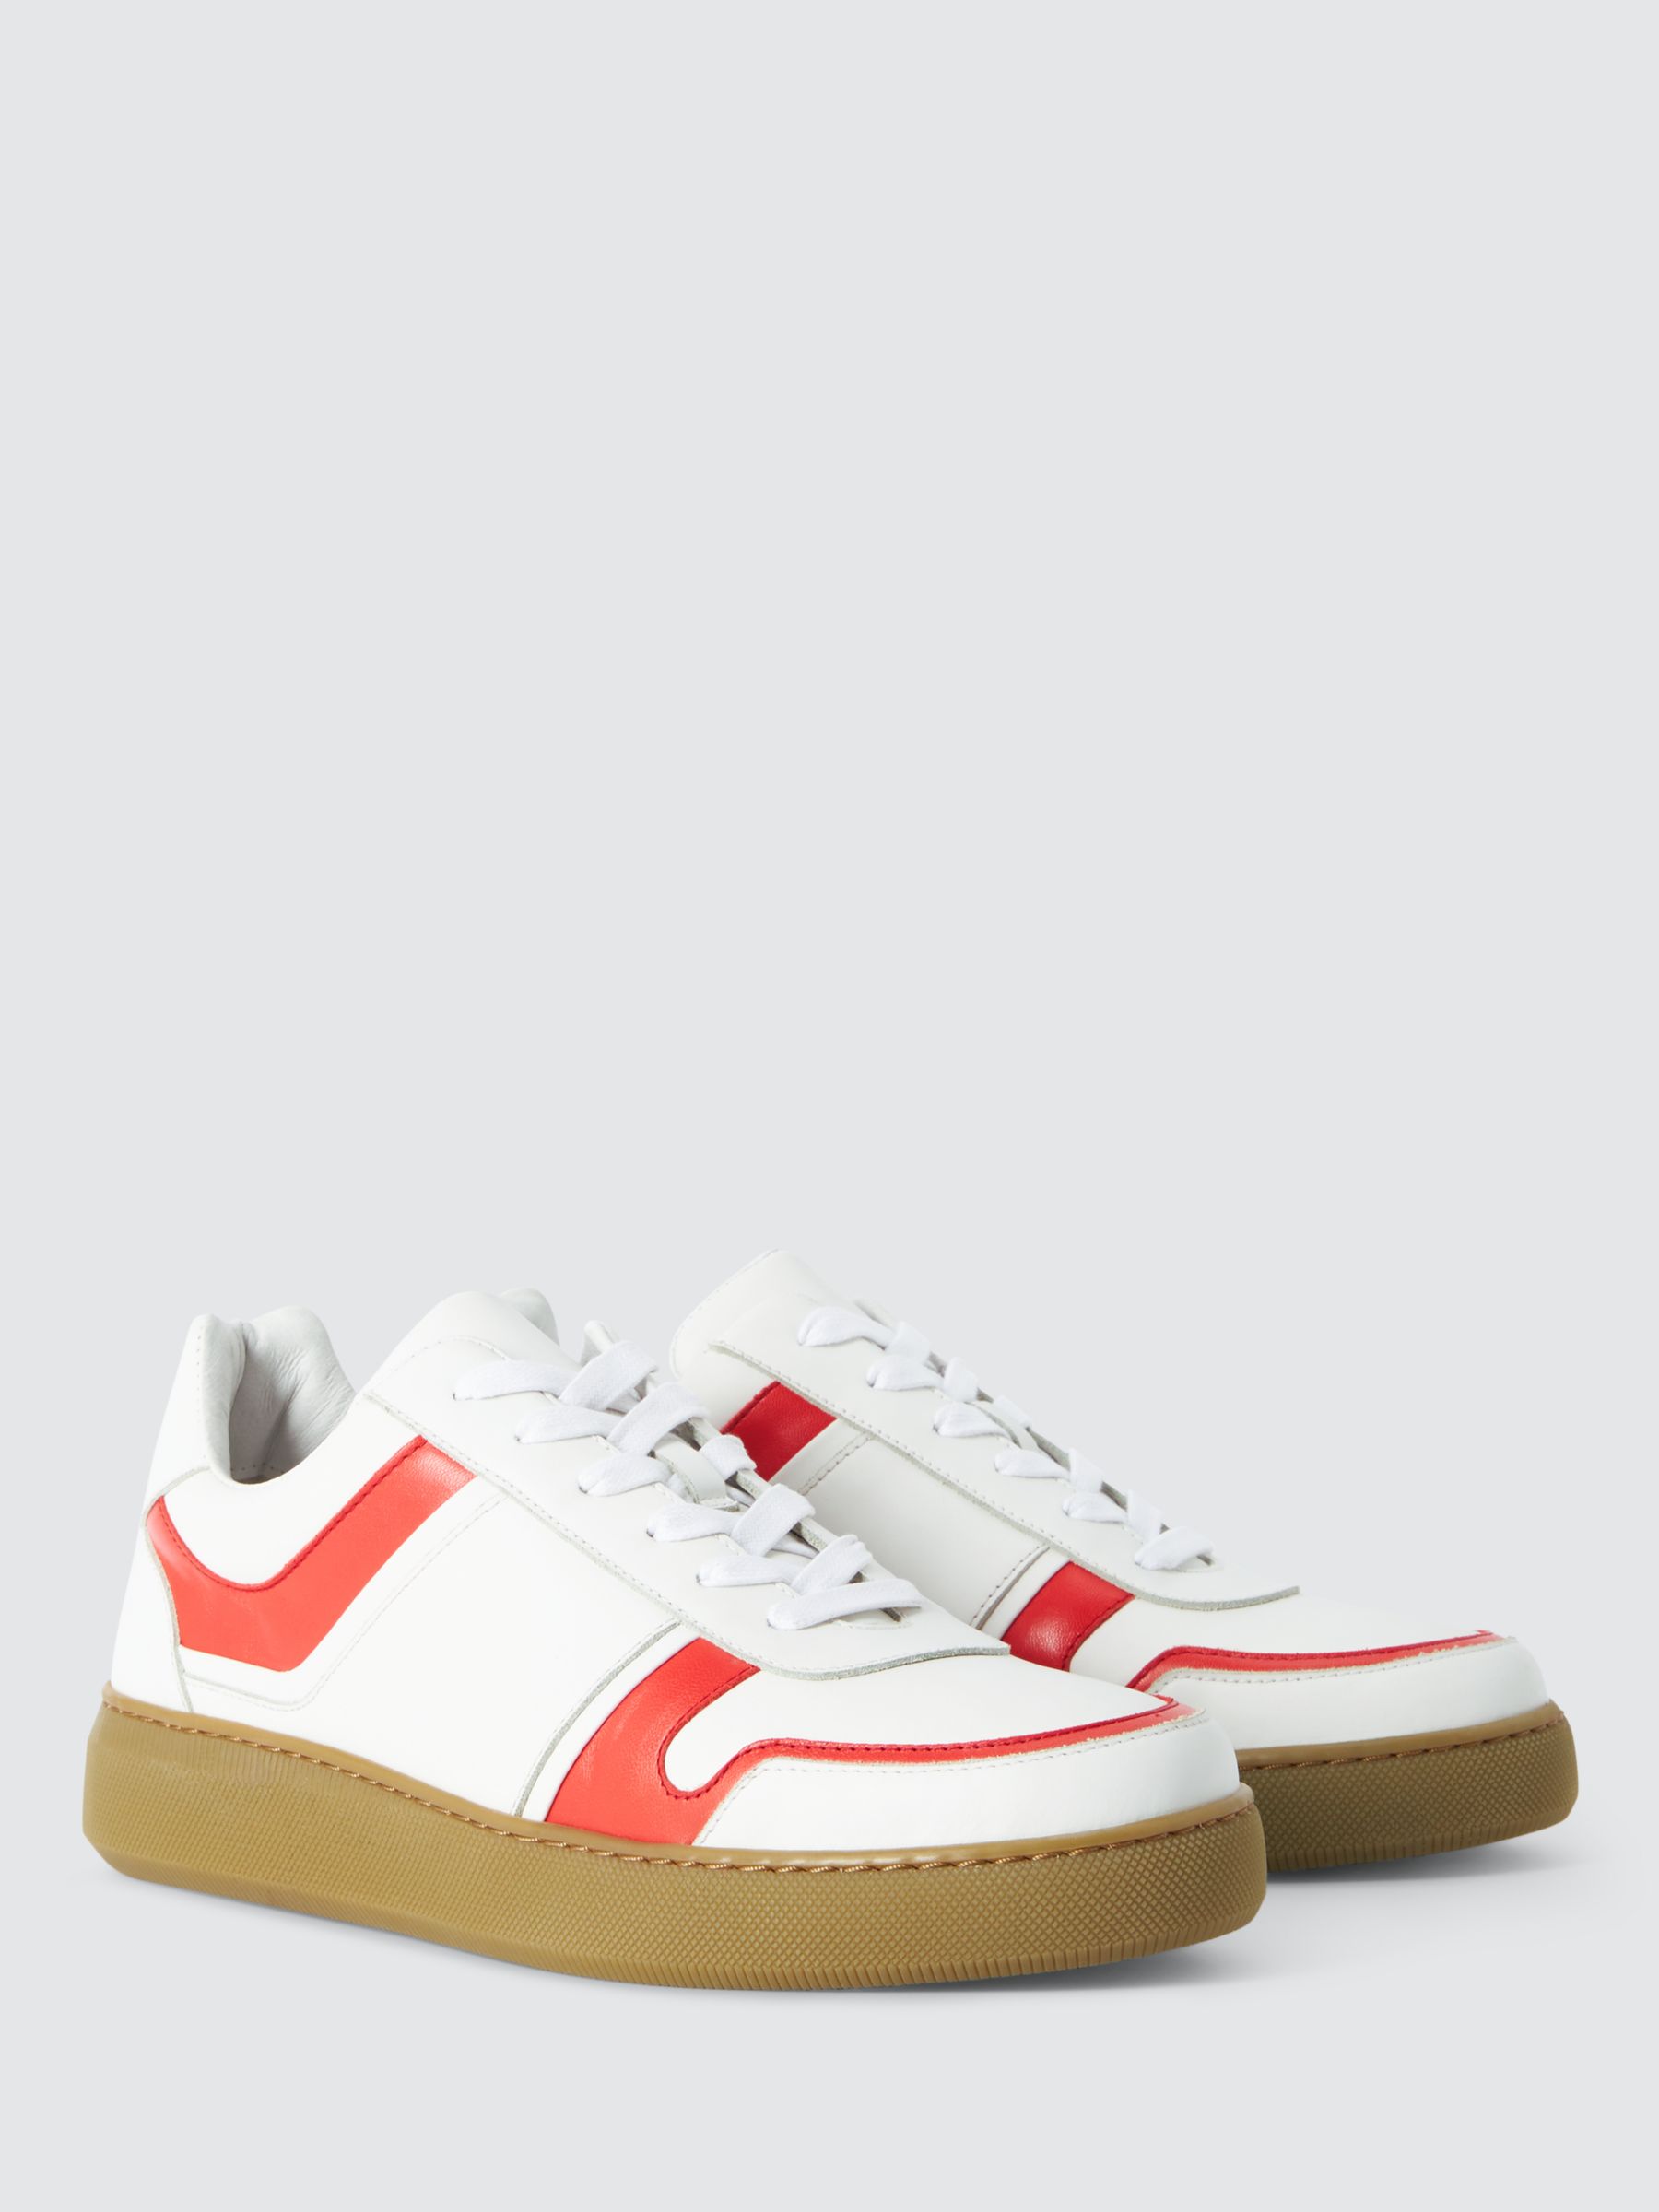 John Lewis Flynne Leather Collegiate Cupsole Trainers, Red at John ...